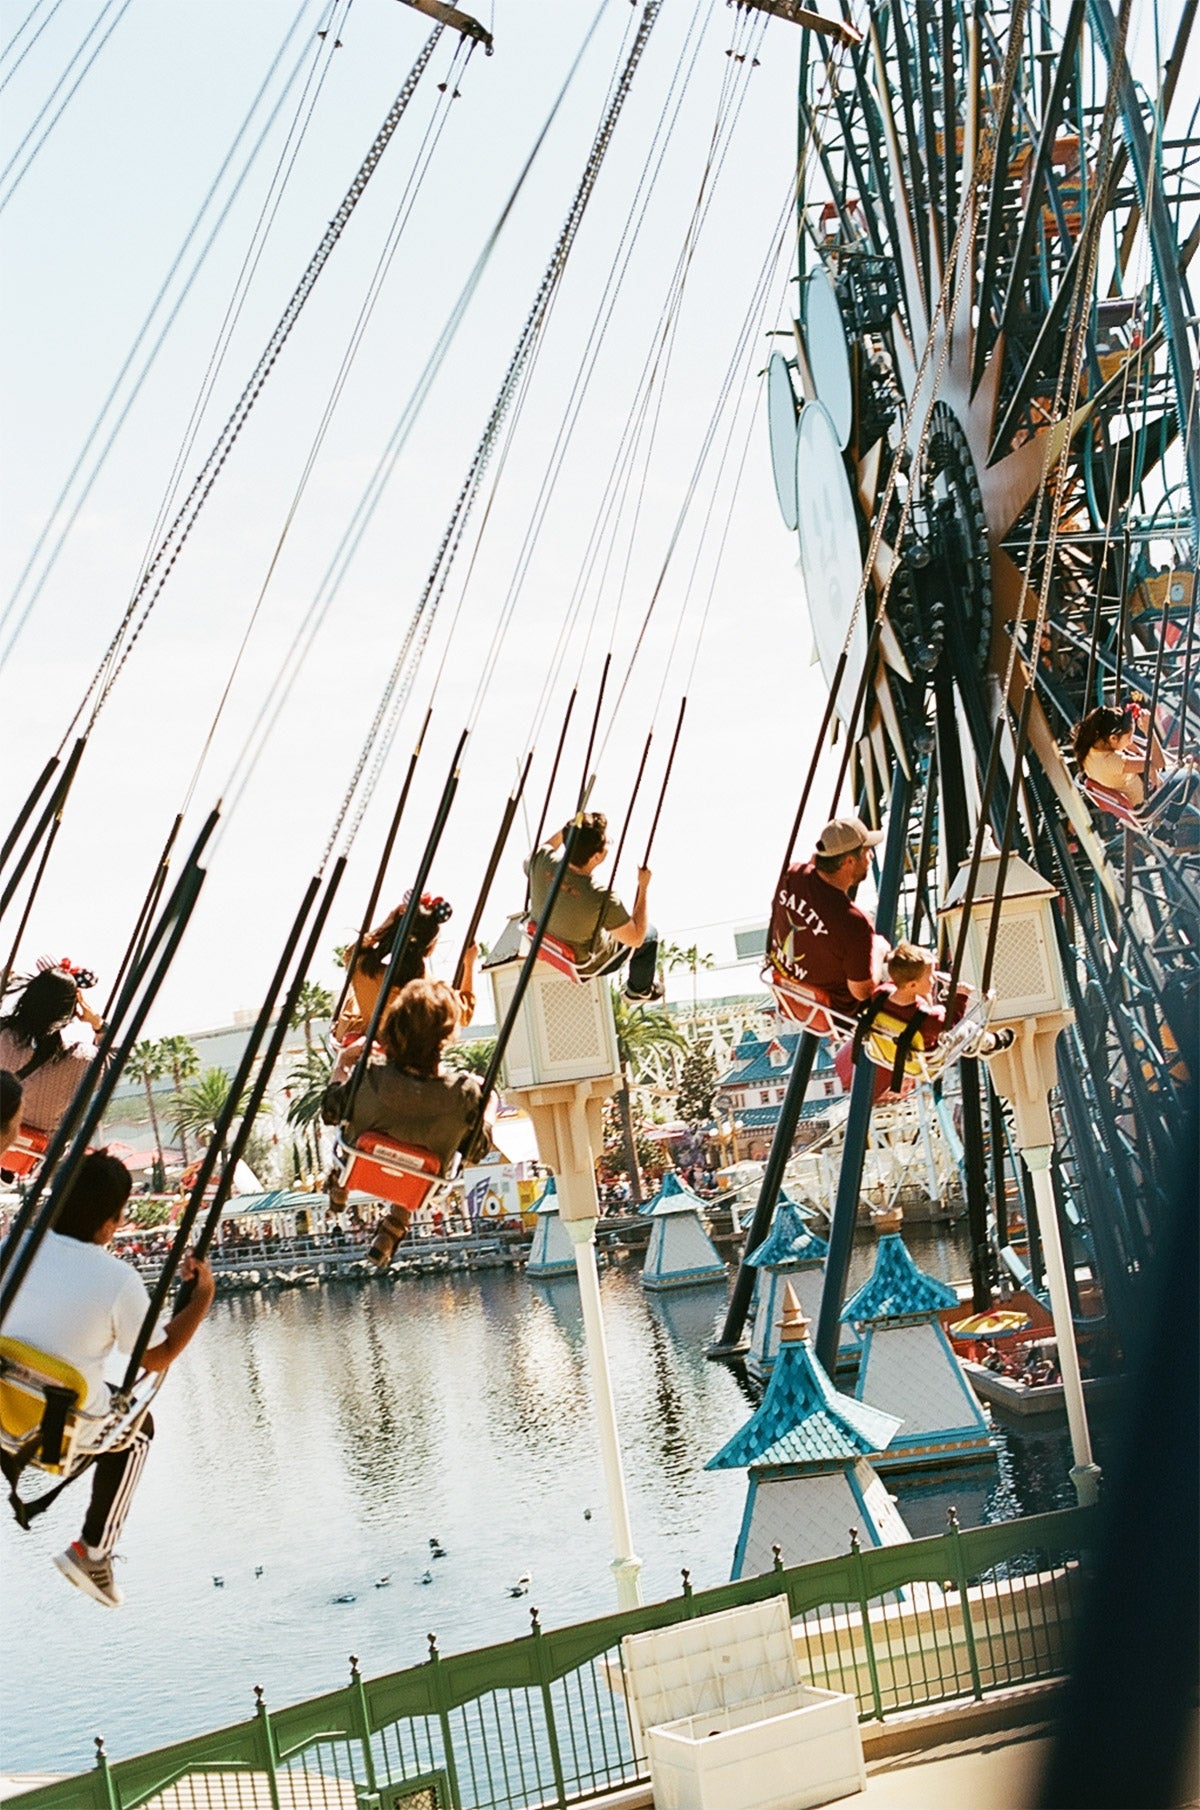 People riding carousel swing ride at an amusement park